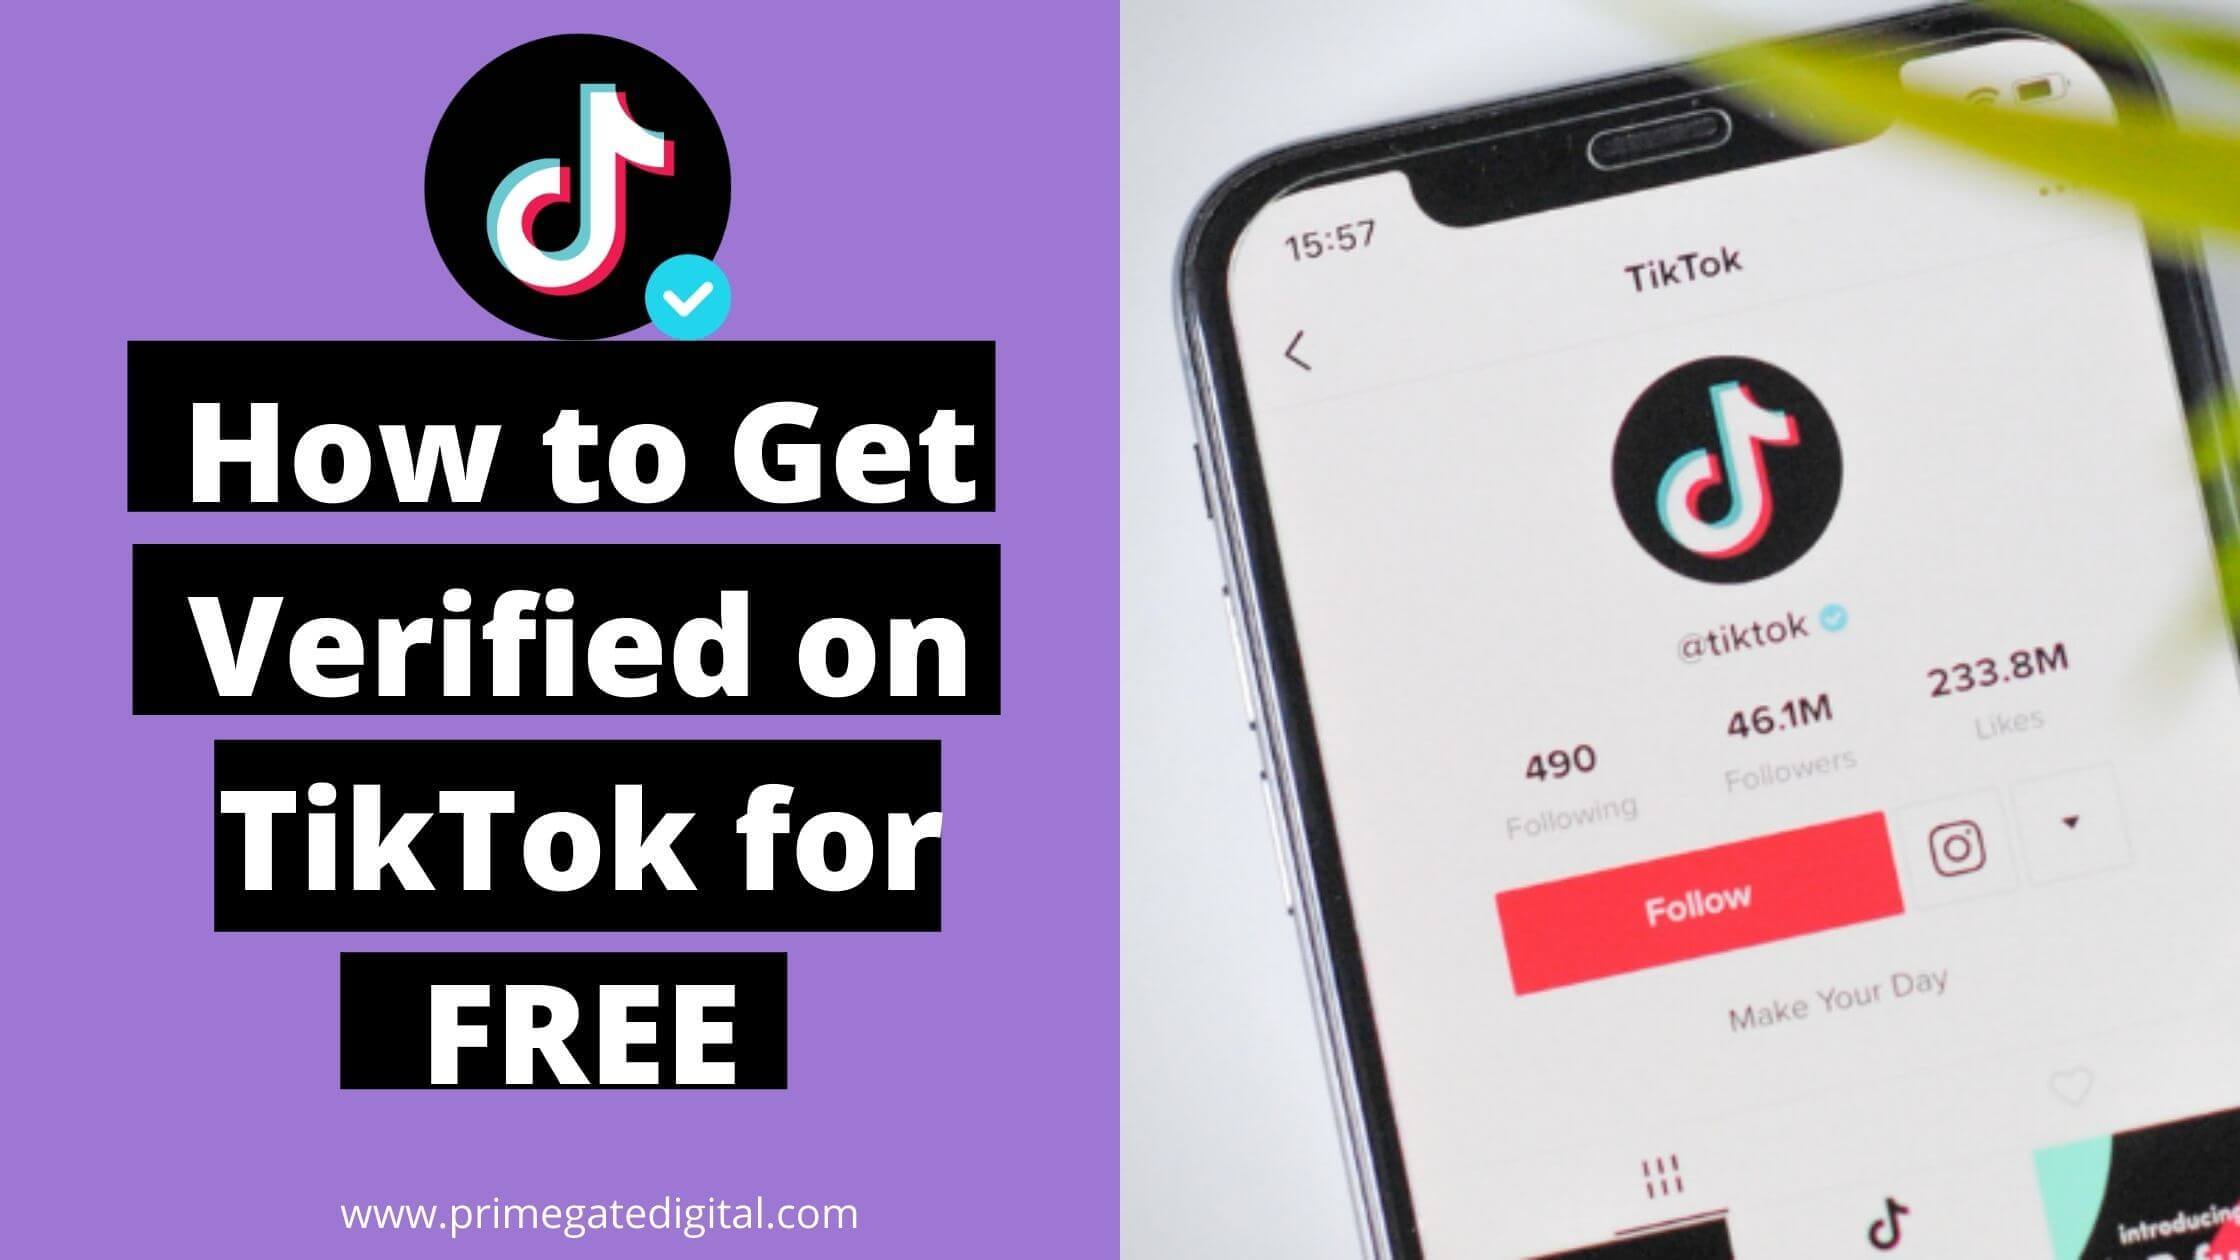 How to get verified on TikTok for free